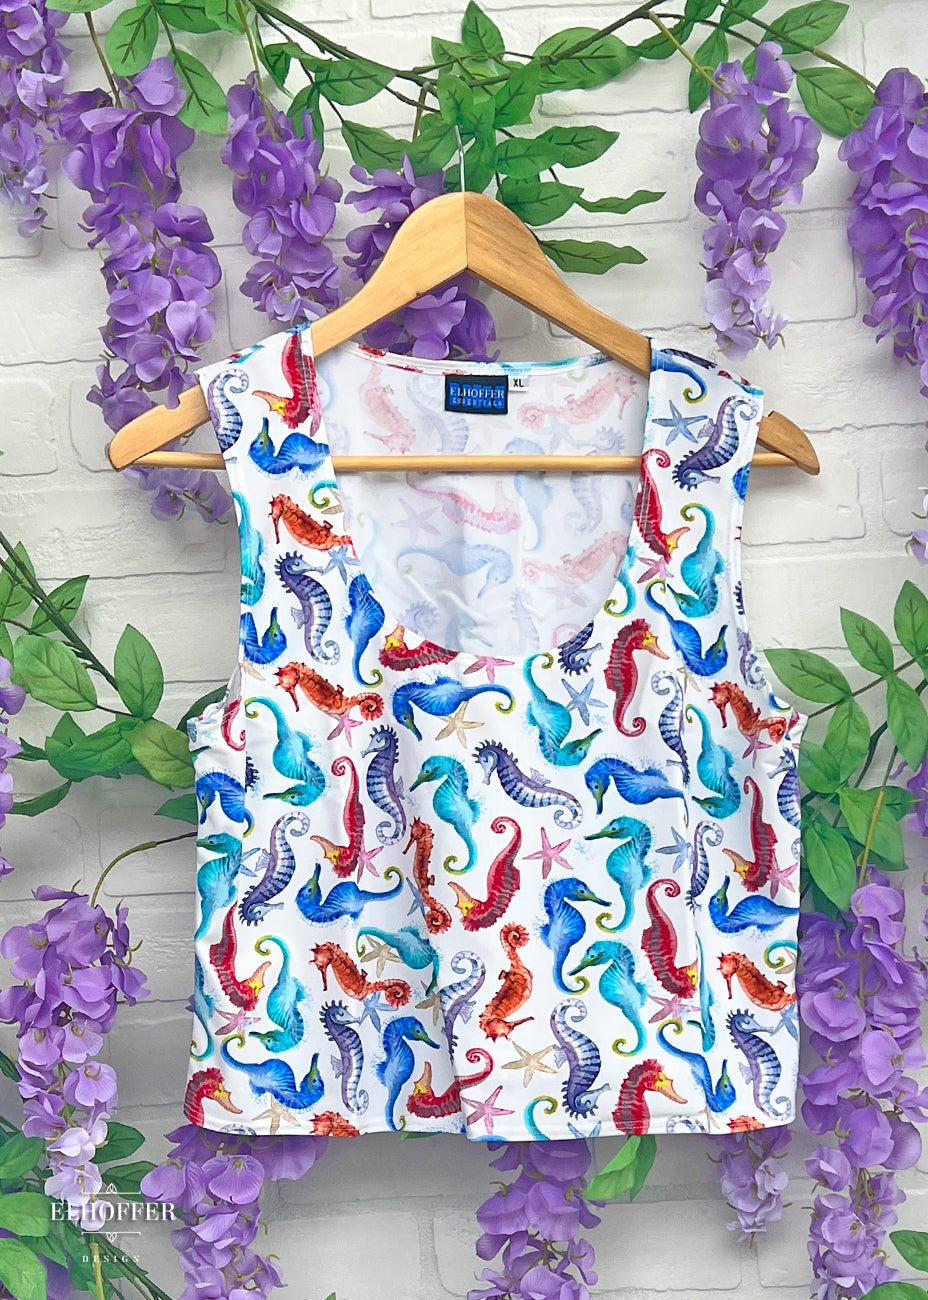 On a hanger in front of wisteria vines, is a sleeveless scoop neck crop top.  The main body of the crop top is white and has rainbow colored seahorses repeating throughout. 